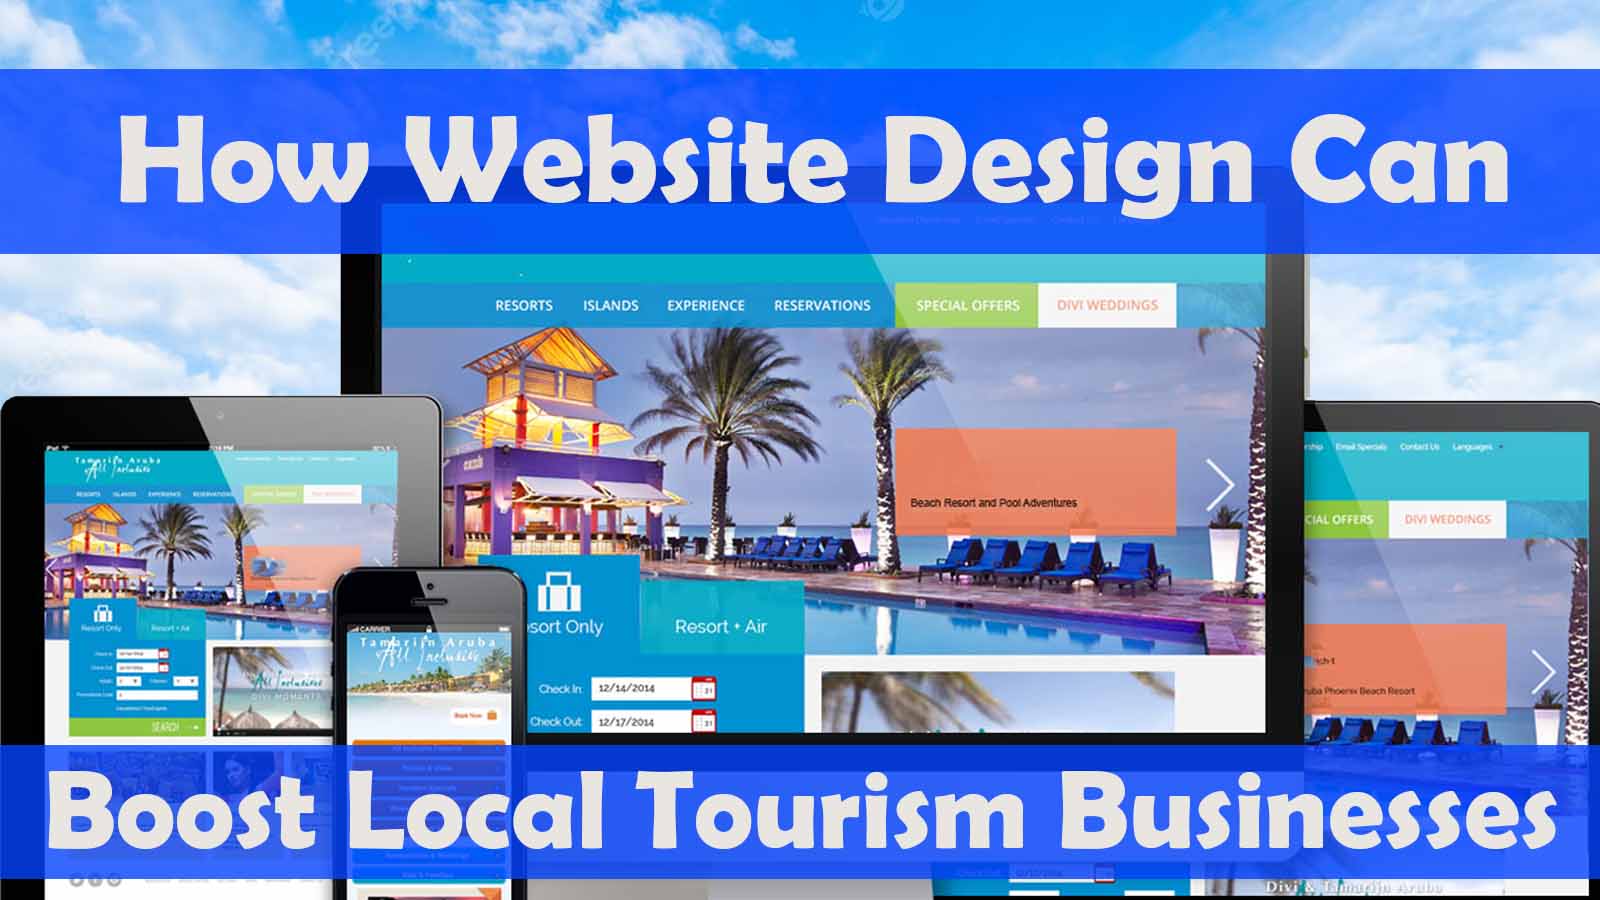 How Website Design Can Boost Local Tourism Businesses